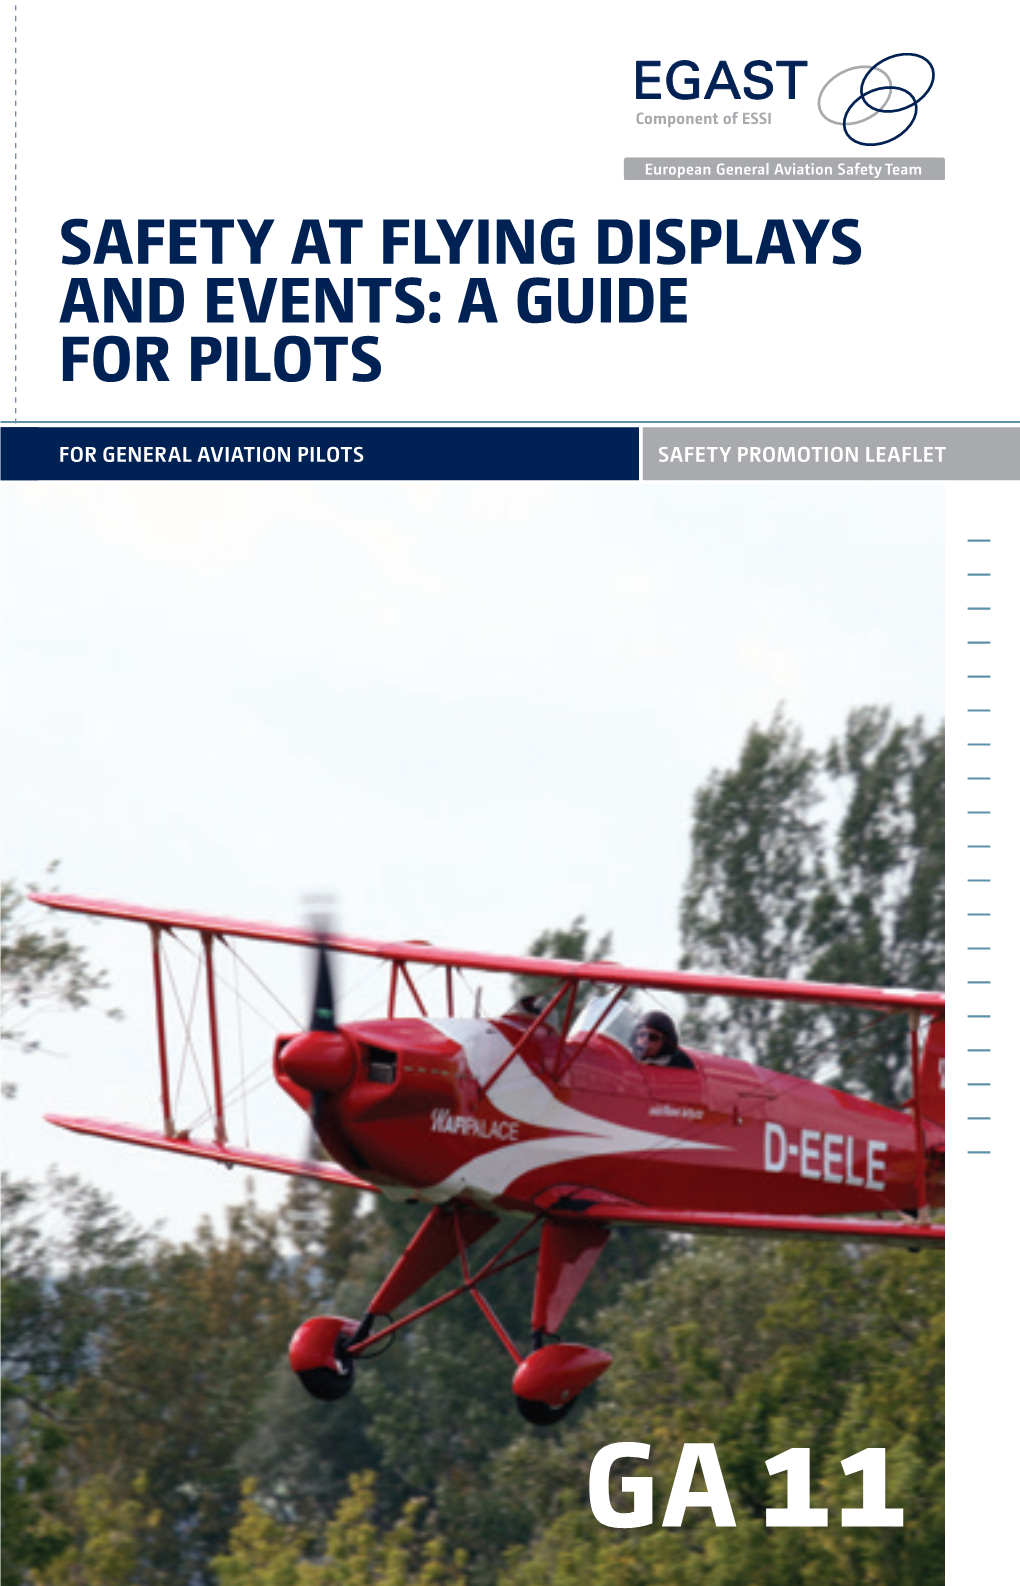 Safety at Flying Displays and Events: a Guide for Pilots